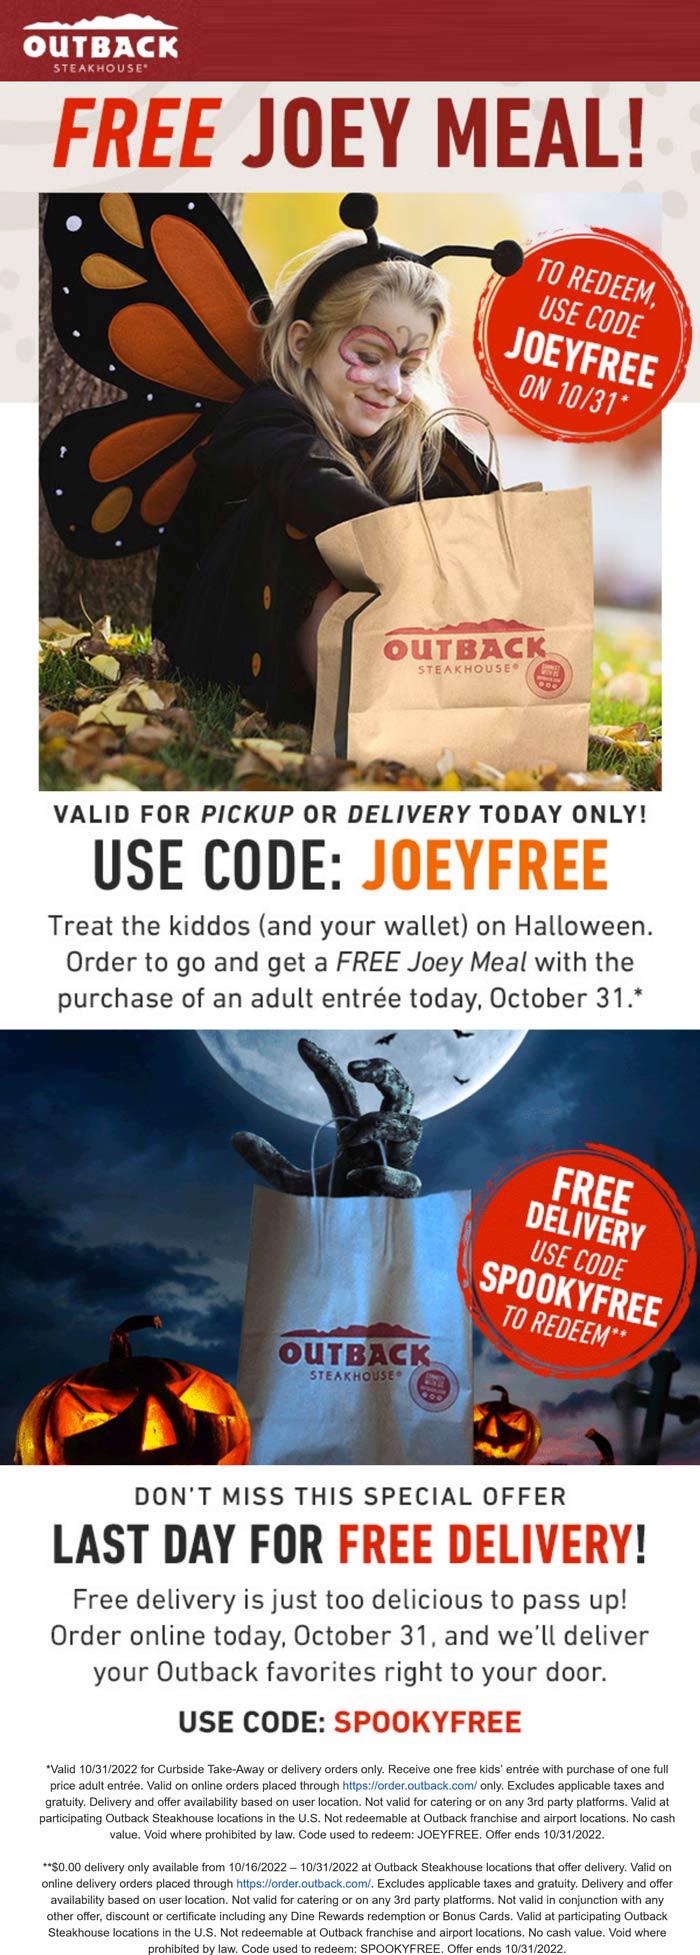 Outback Steakhouse restaurants Coupon  Free takeout or delivery kids meal today at Outback Steakhouse via promo code JOEYFREE #outbacksteakhouse 